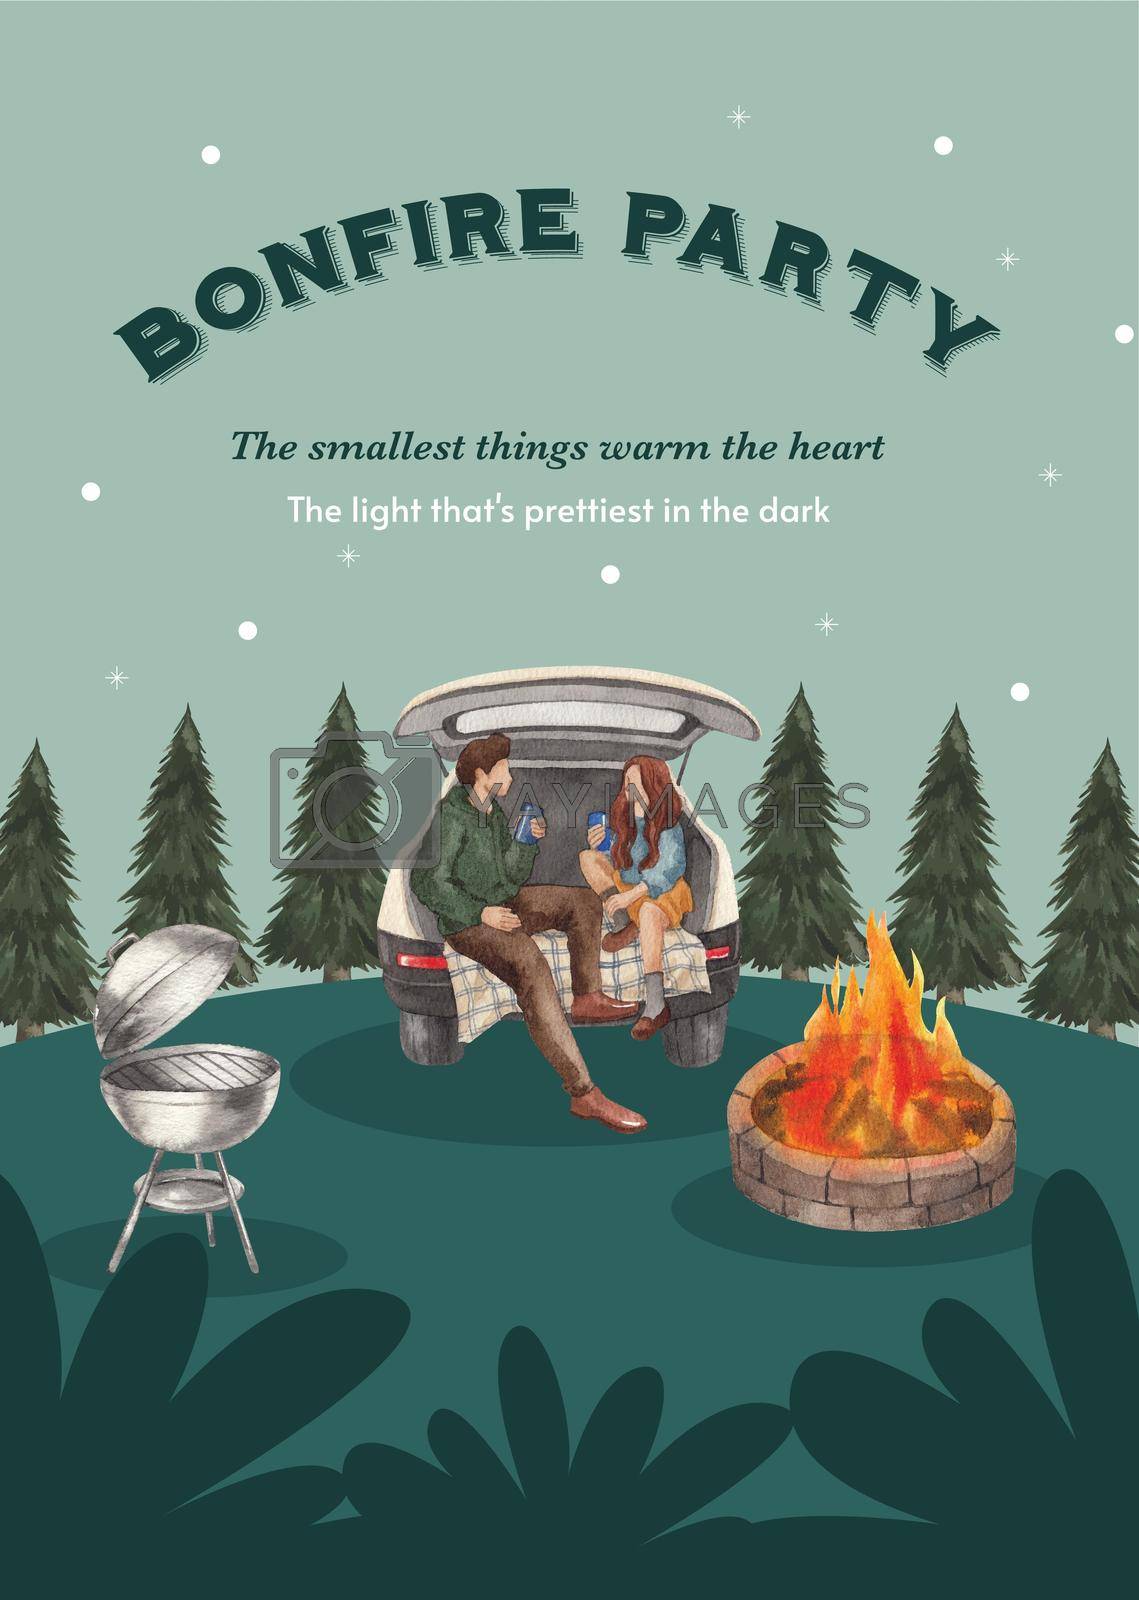 Royalty free image of Poster template with bonfire party concept,watercolor style by Photographeeasia